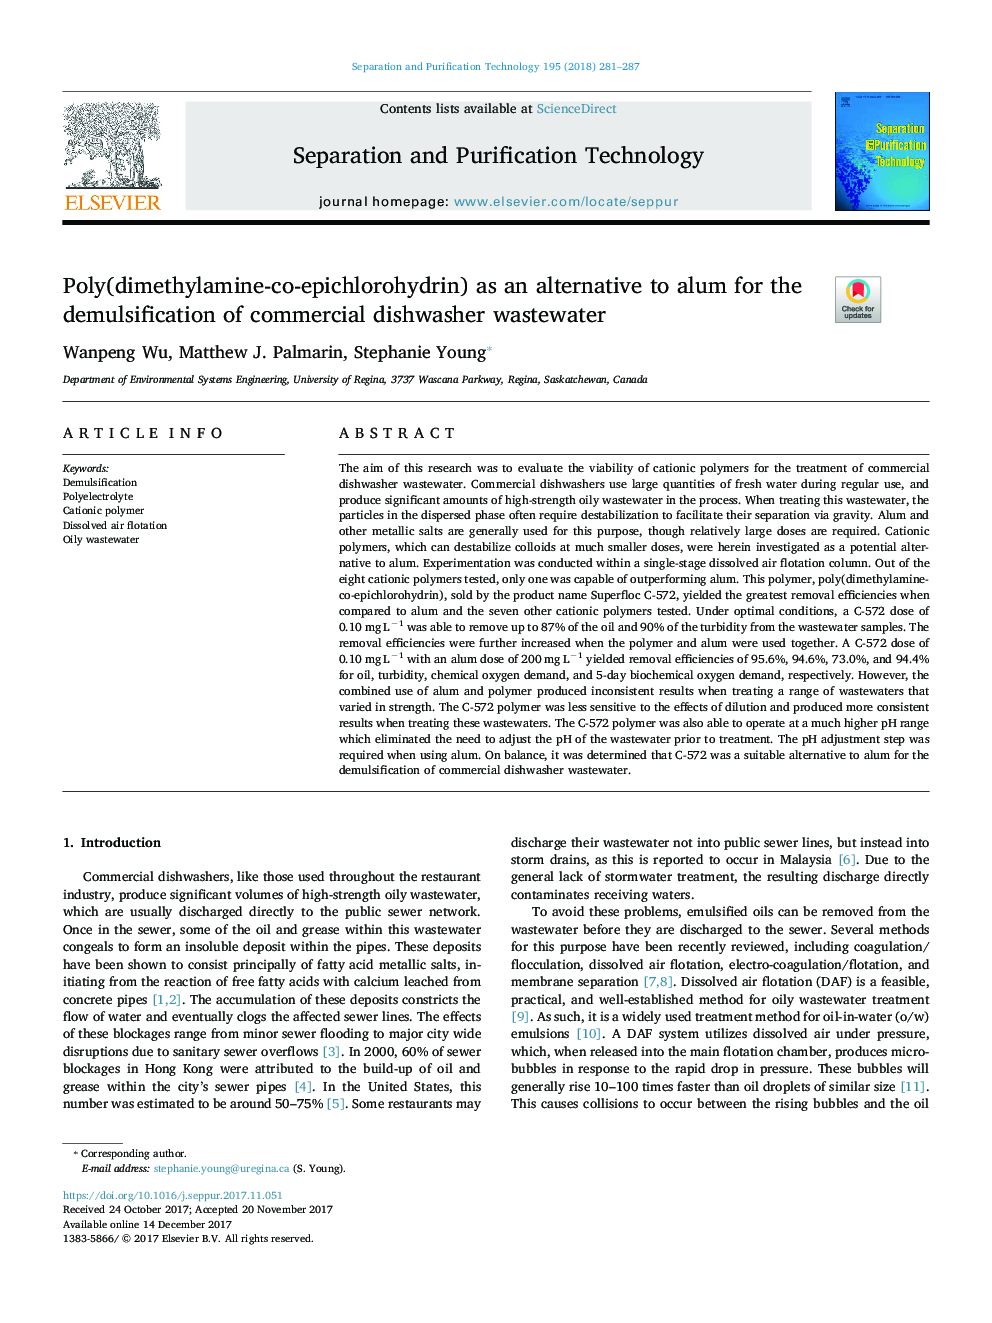 Poly(dimethylamine-co-epichlorohydrin) as an alternative to alum for the demulsification of commercial dishwasher wastewater